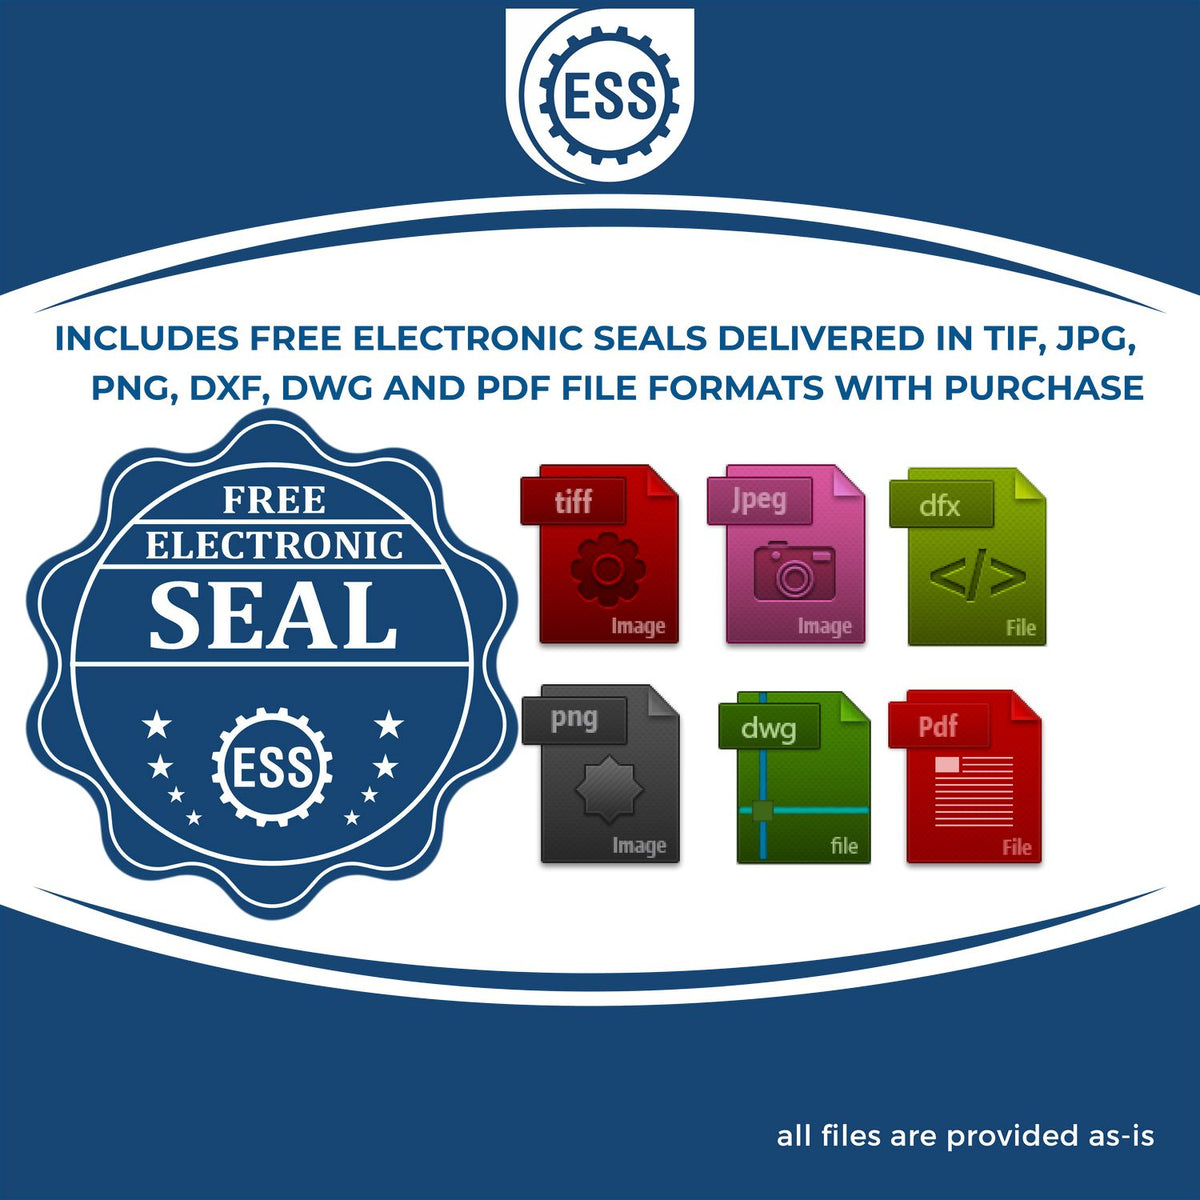 An infographic for the free electronic seal for the Heavy Duty Cast Iron Georgia Land Surveyor Seal Embosser illustrating the different file type icons such as DXF, DWG, TIF, JPG and PNG.